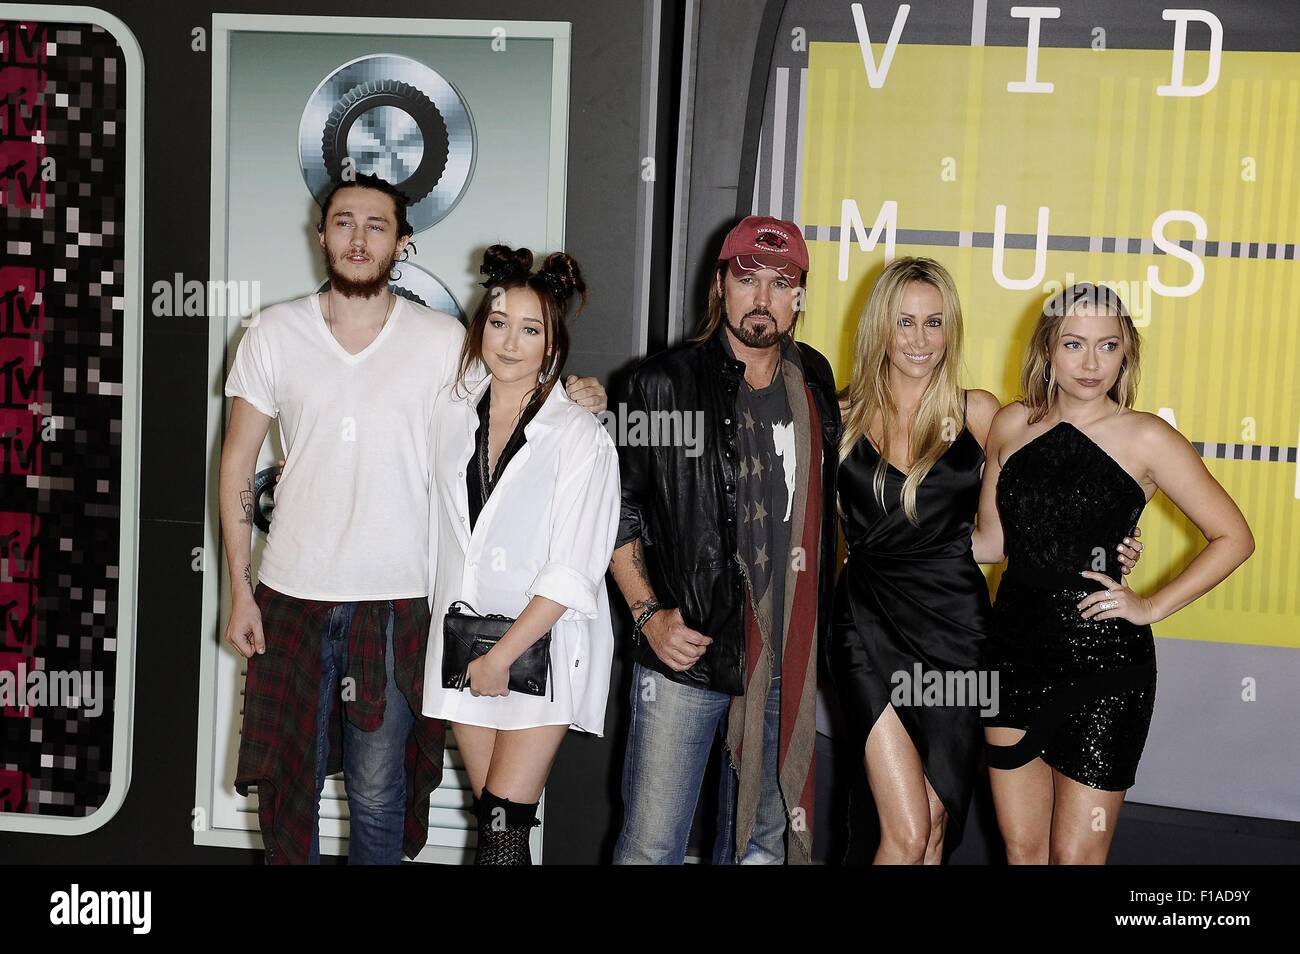 Los Angeles, CA, USA. 30th Aug, 2015. Braison Cyrus, Noah Cyrus, Billy Ray Cyrus, Tish Cyrus, Brandi Cyrus at arrivals for MTV Video Music Awards (VMA) 2015 - ARRIVALS 1, The Microsoft Theater (formerly Nokia Theatre L.A. Live), Los Angeles, CA August 30, 2015. Credit:  Jenny Maki/Everett Collection/Alamy Live News Stock Photo